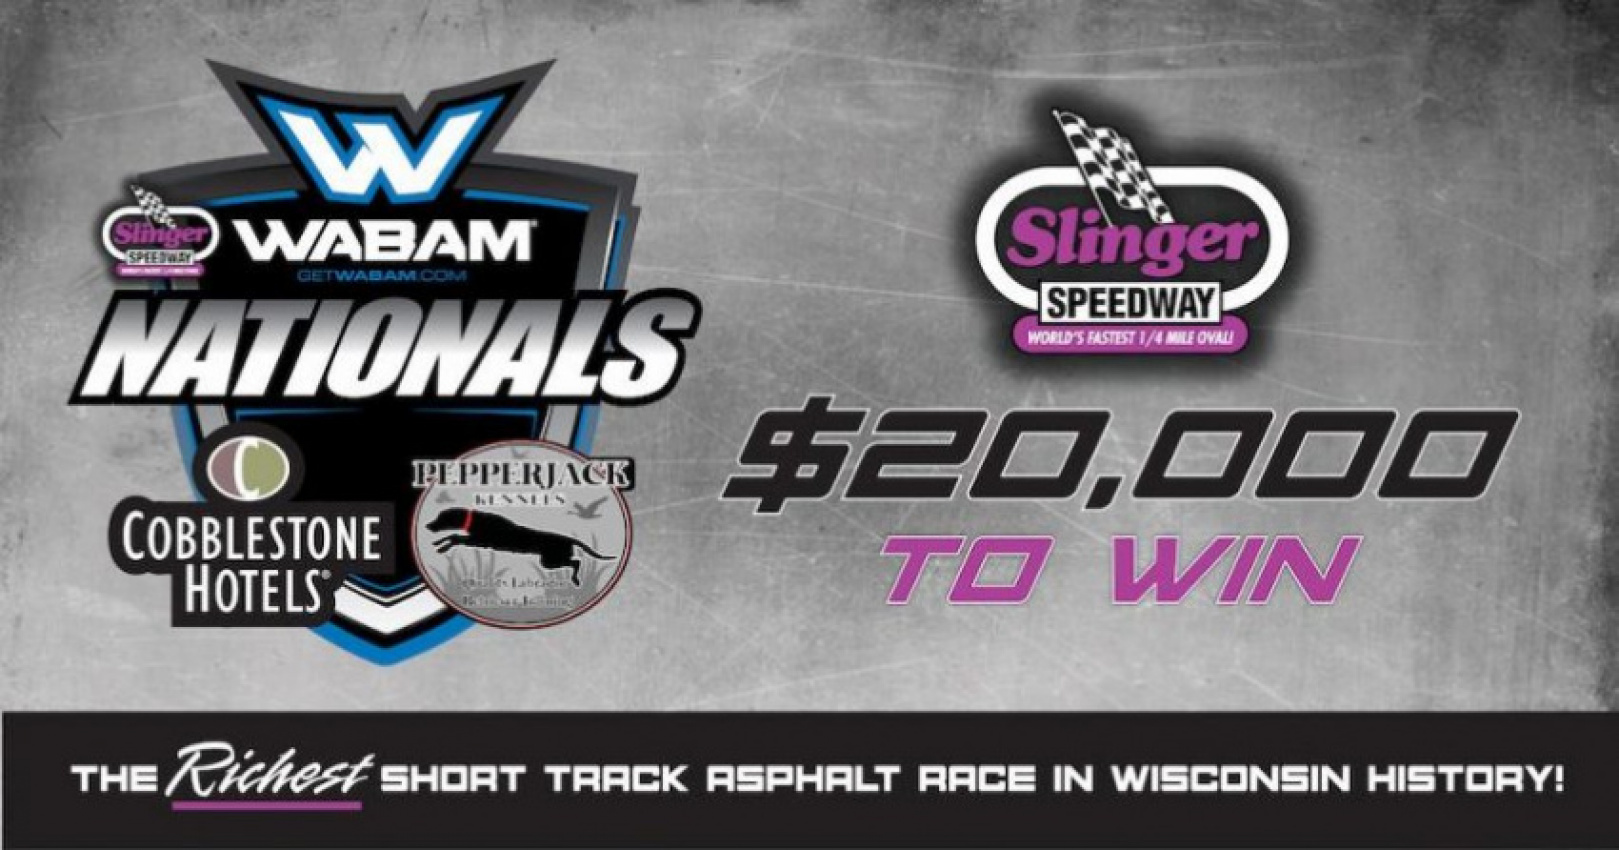 all stock cars, autos, cars, slinger nationals winner to receive $20,000